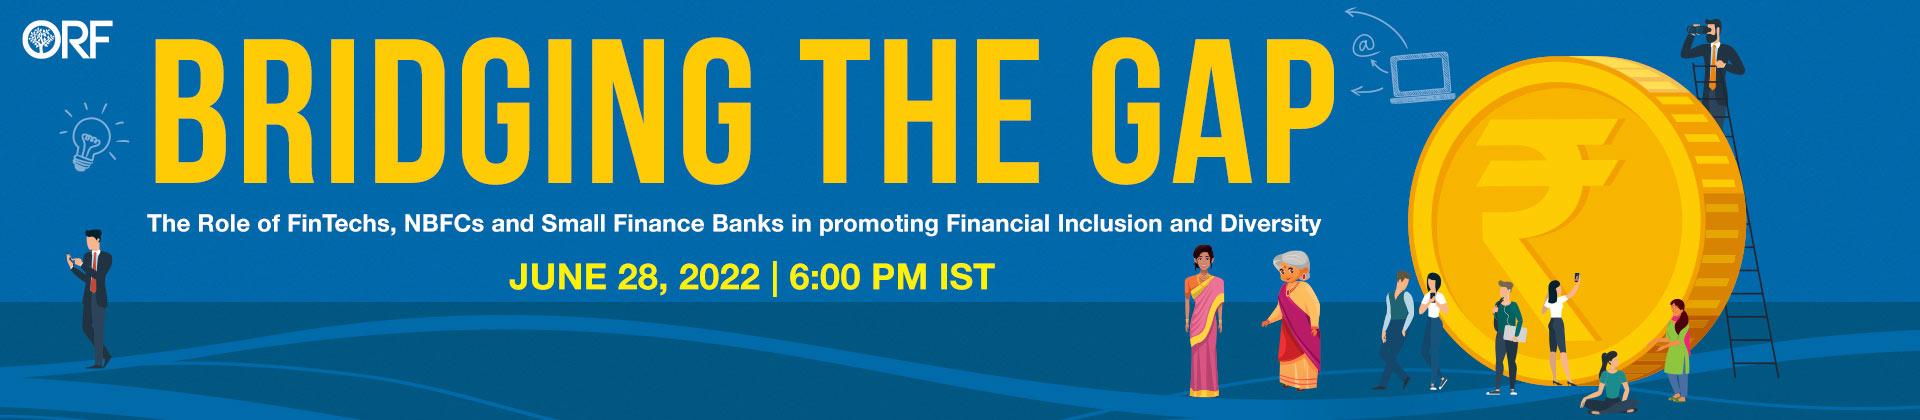 Bridging the Gap: The Role of FinTechs, NBFCs and Small Finance Banks in promoting Financial Inclusion and Diversity